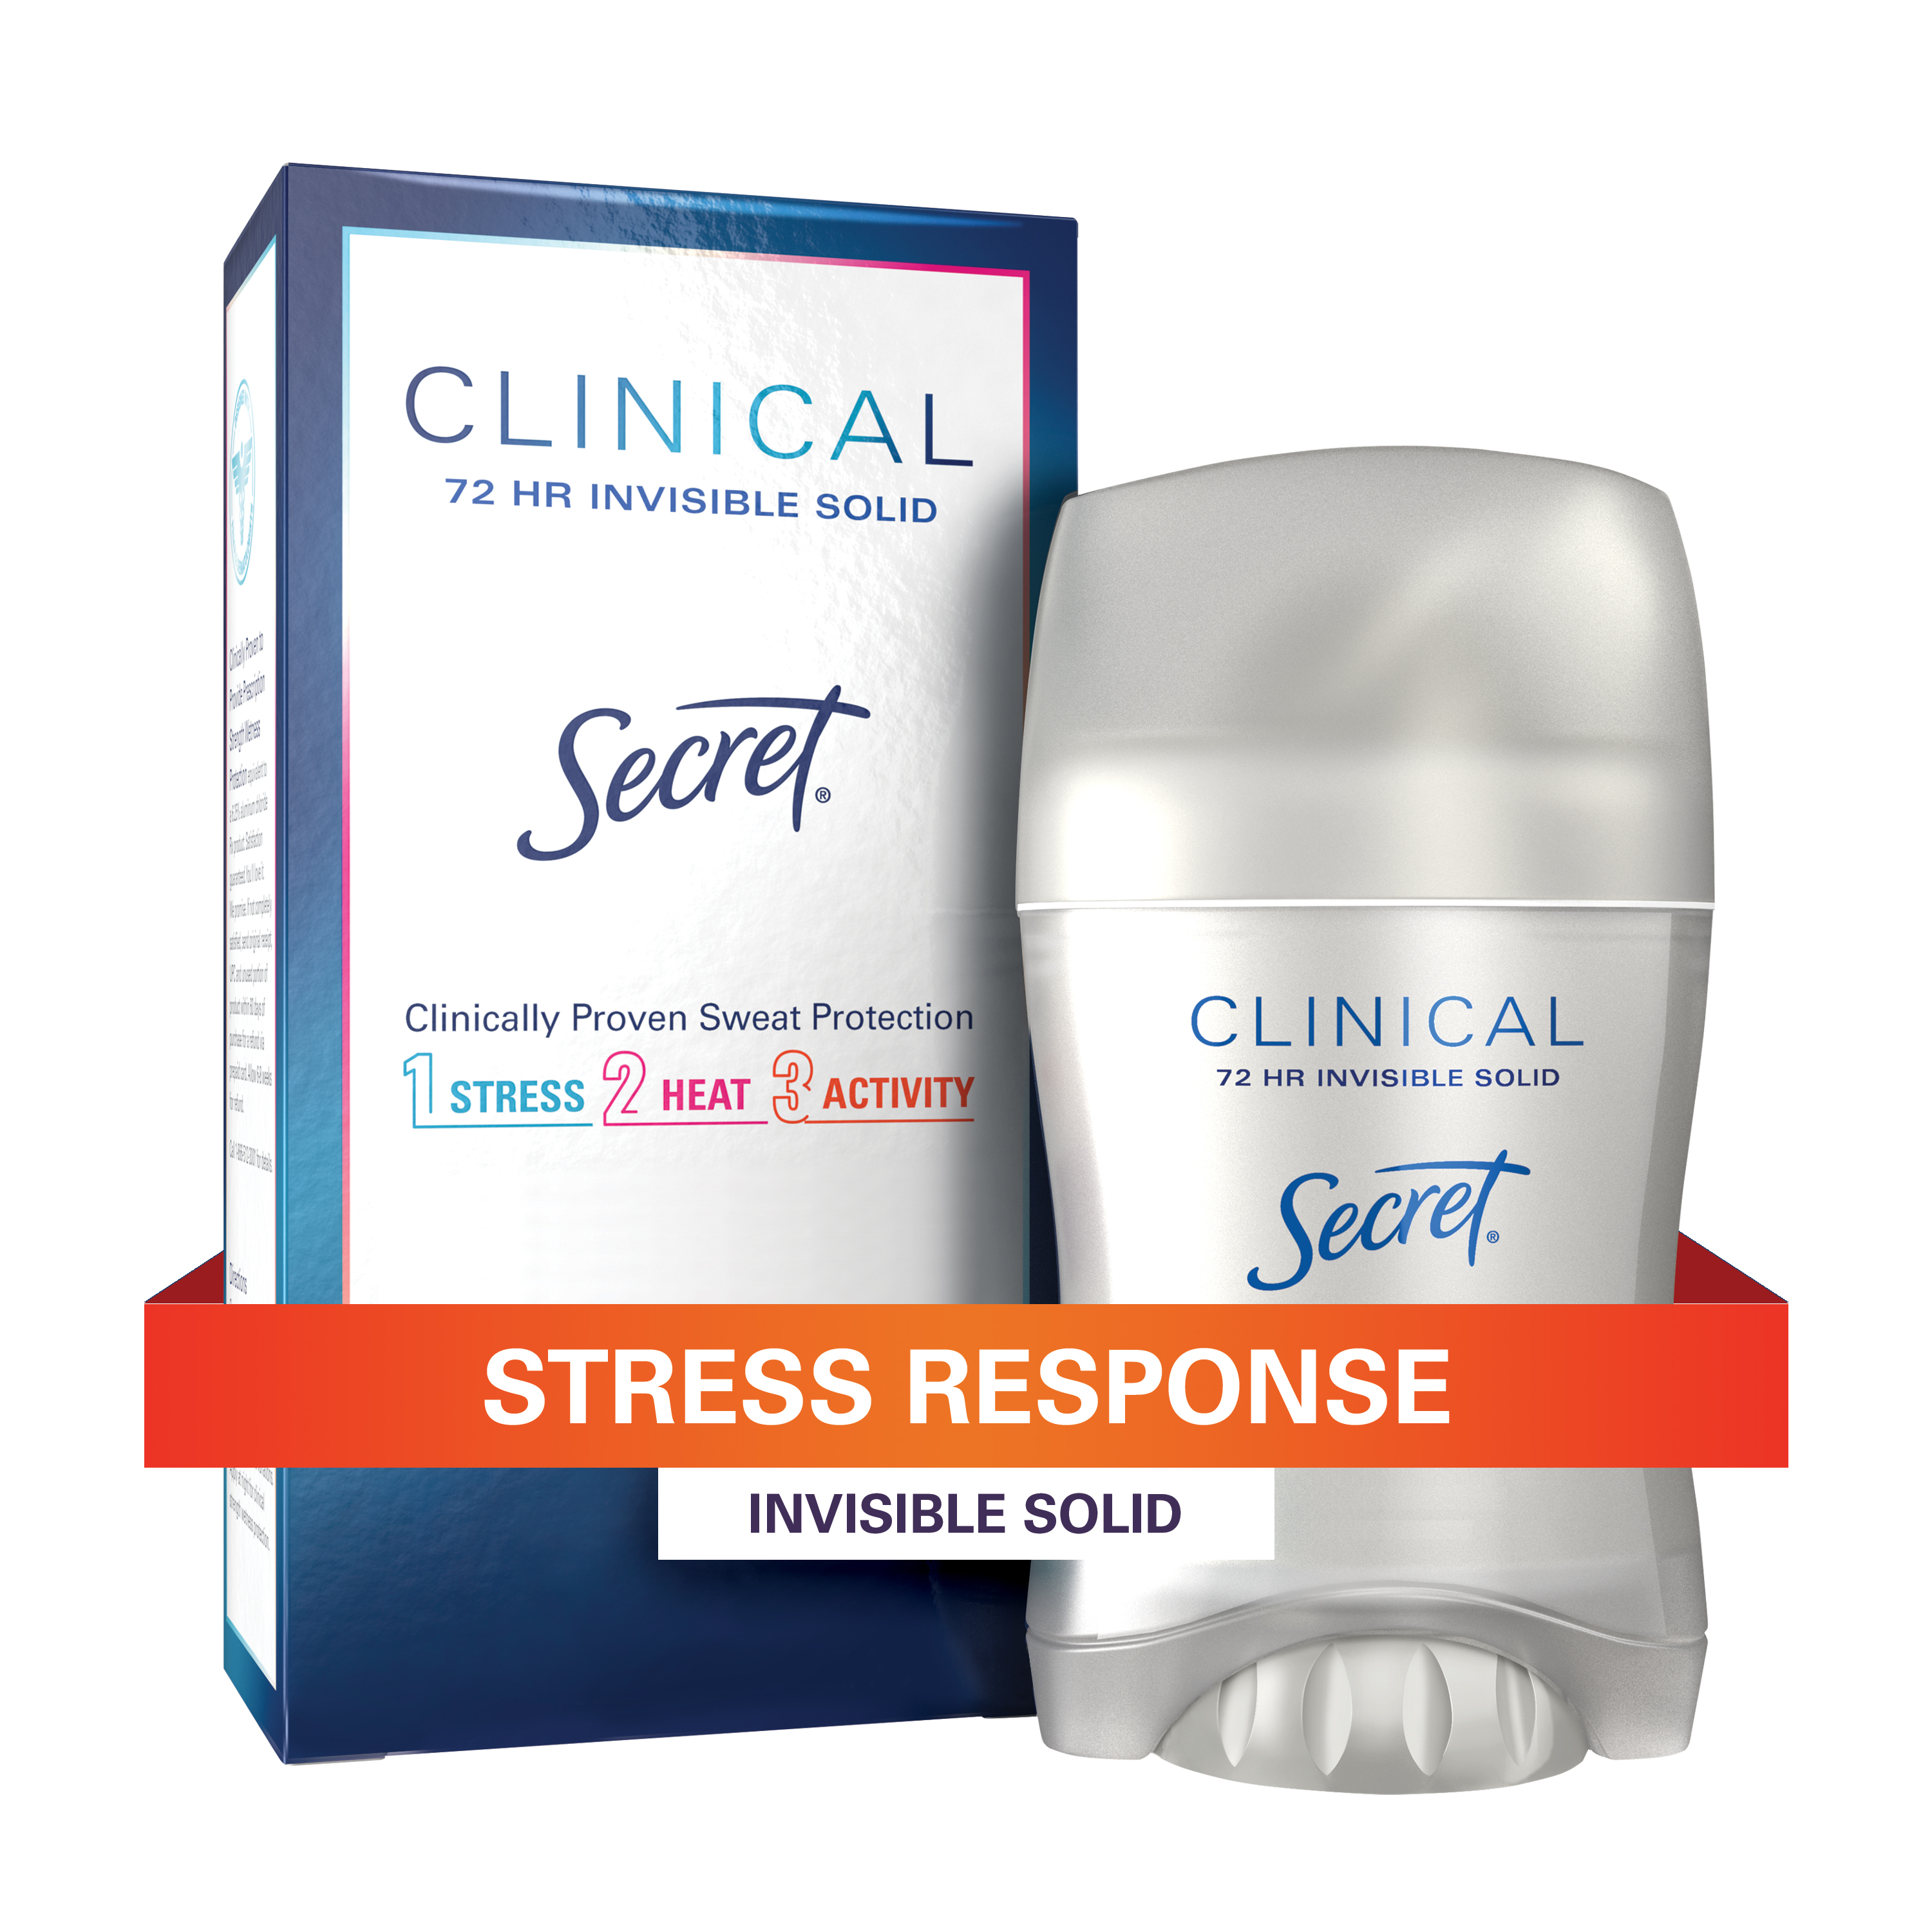 Secret Clinical Strength Invisible Solid Antiperspirant and Deodorant for Women, Stress Response, 1.6 oz - image 1 of 9